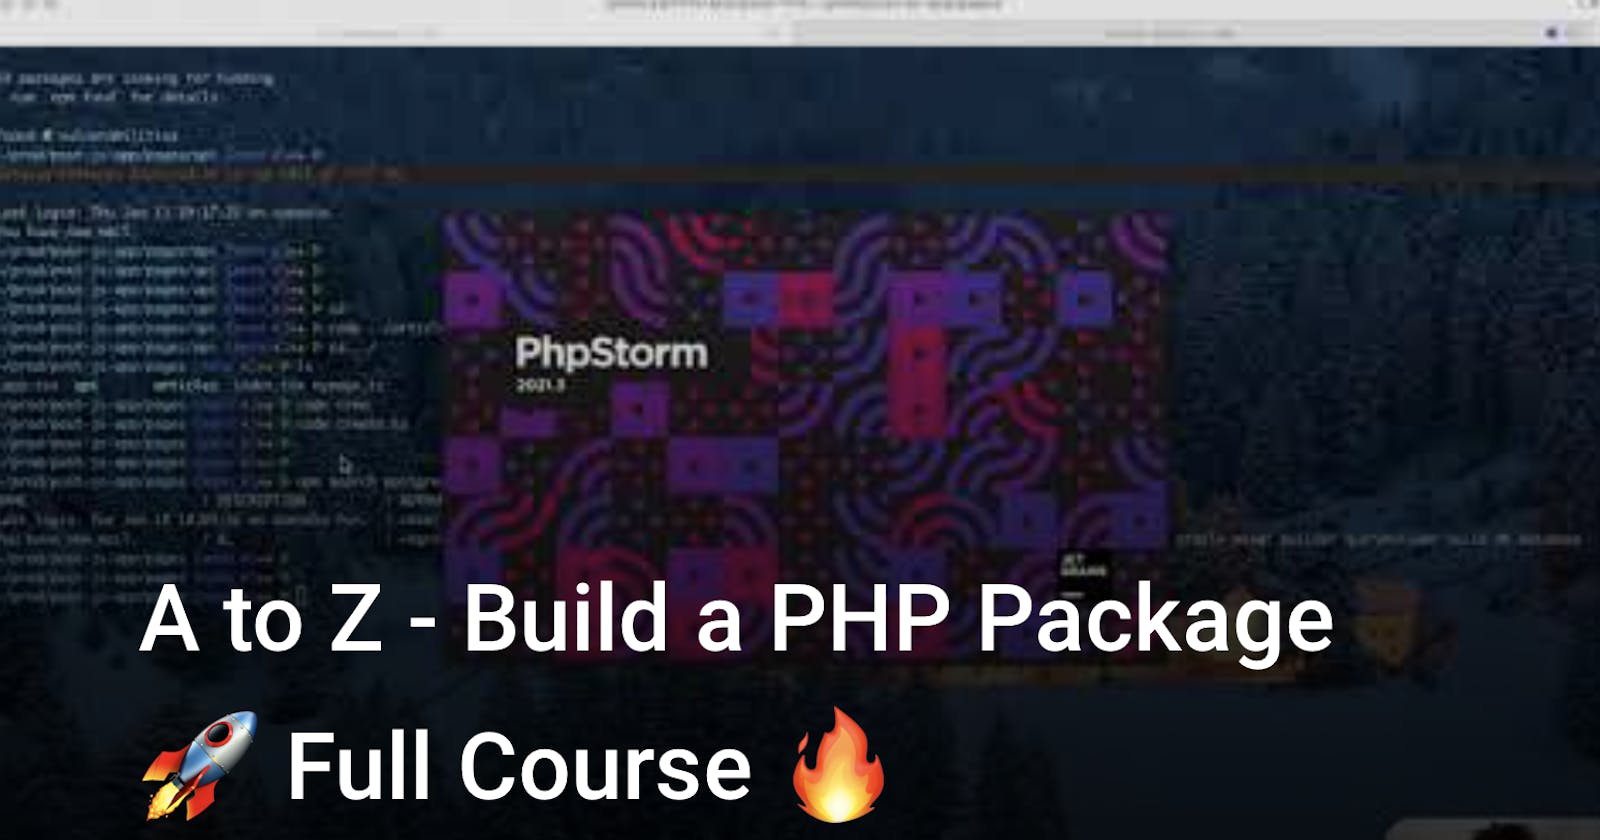 Build a PHP Package from A to Z